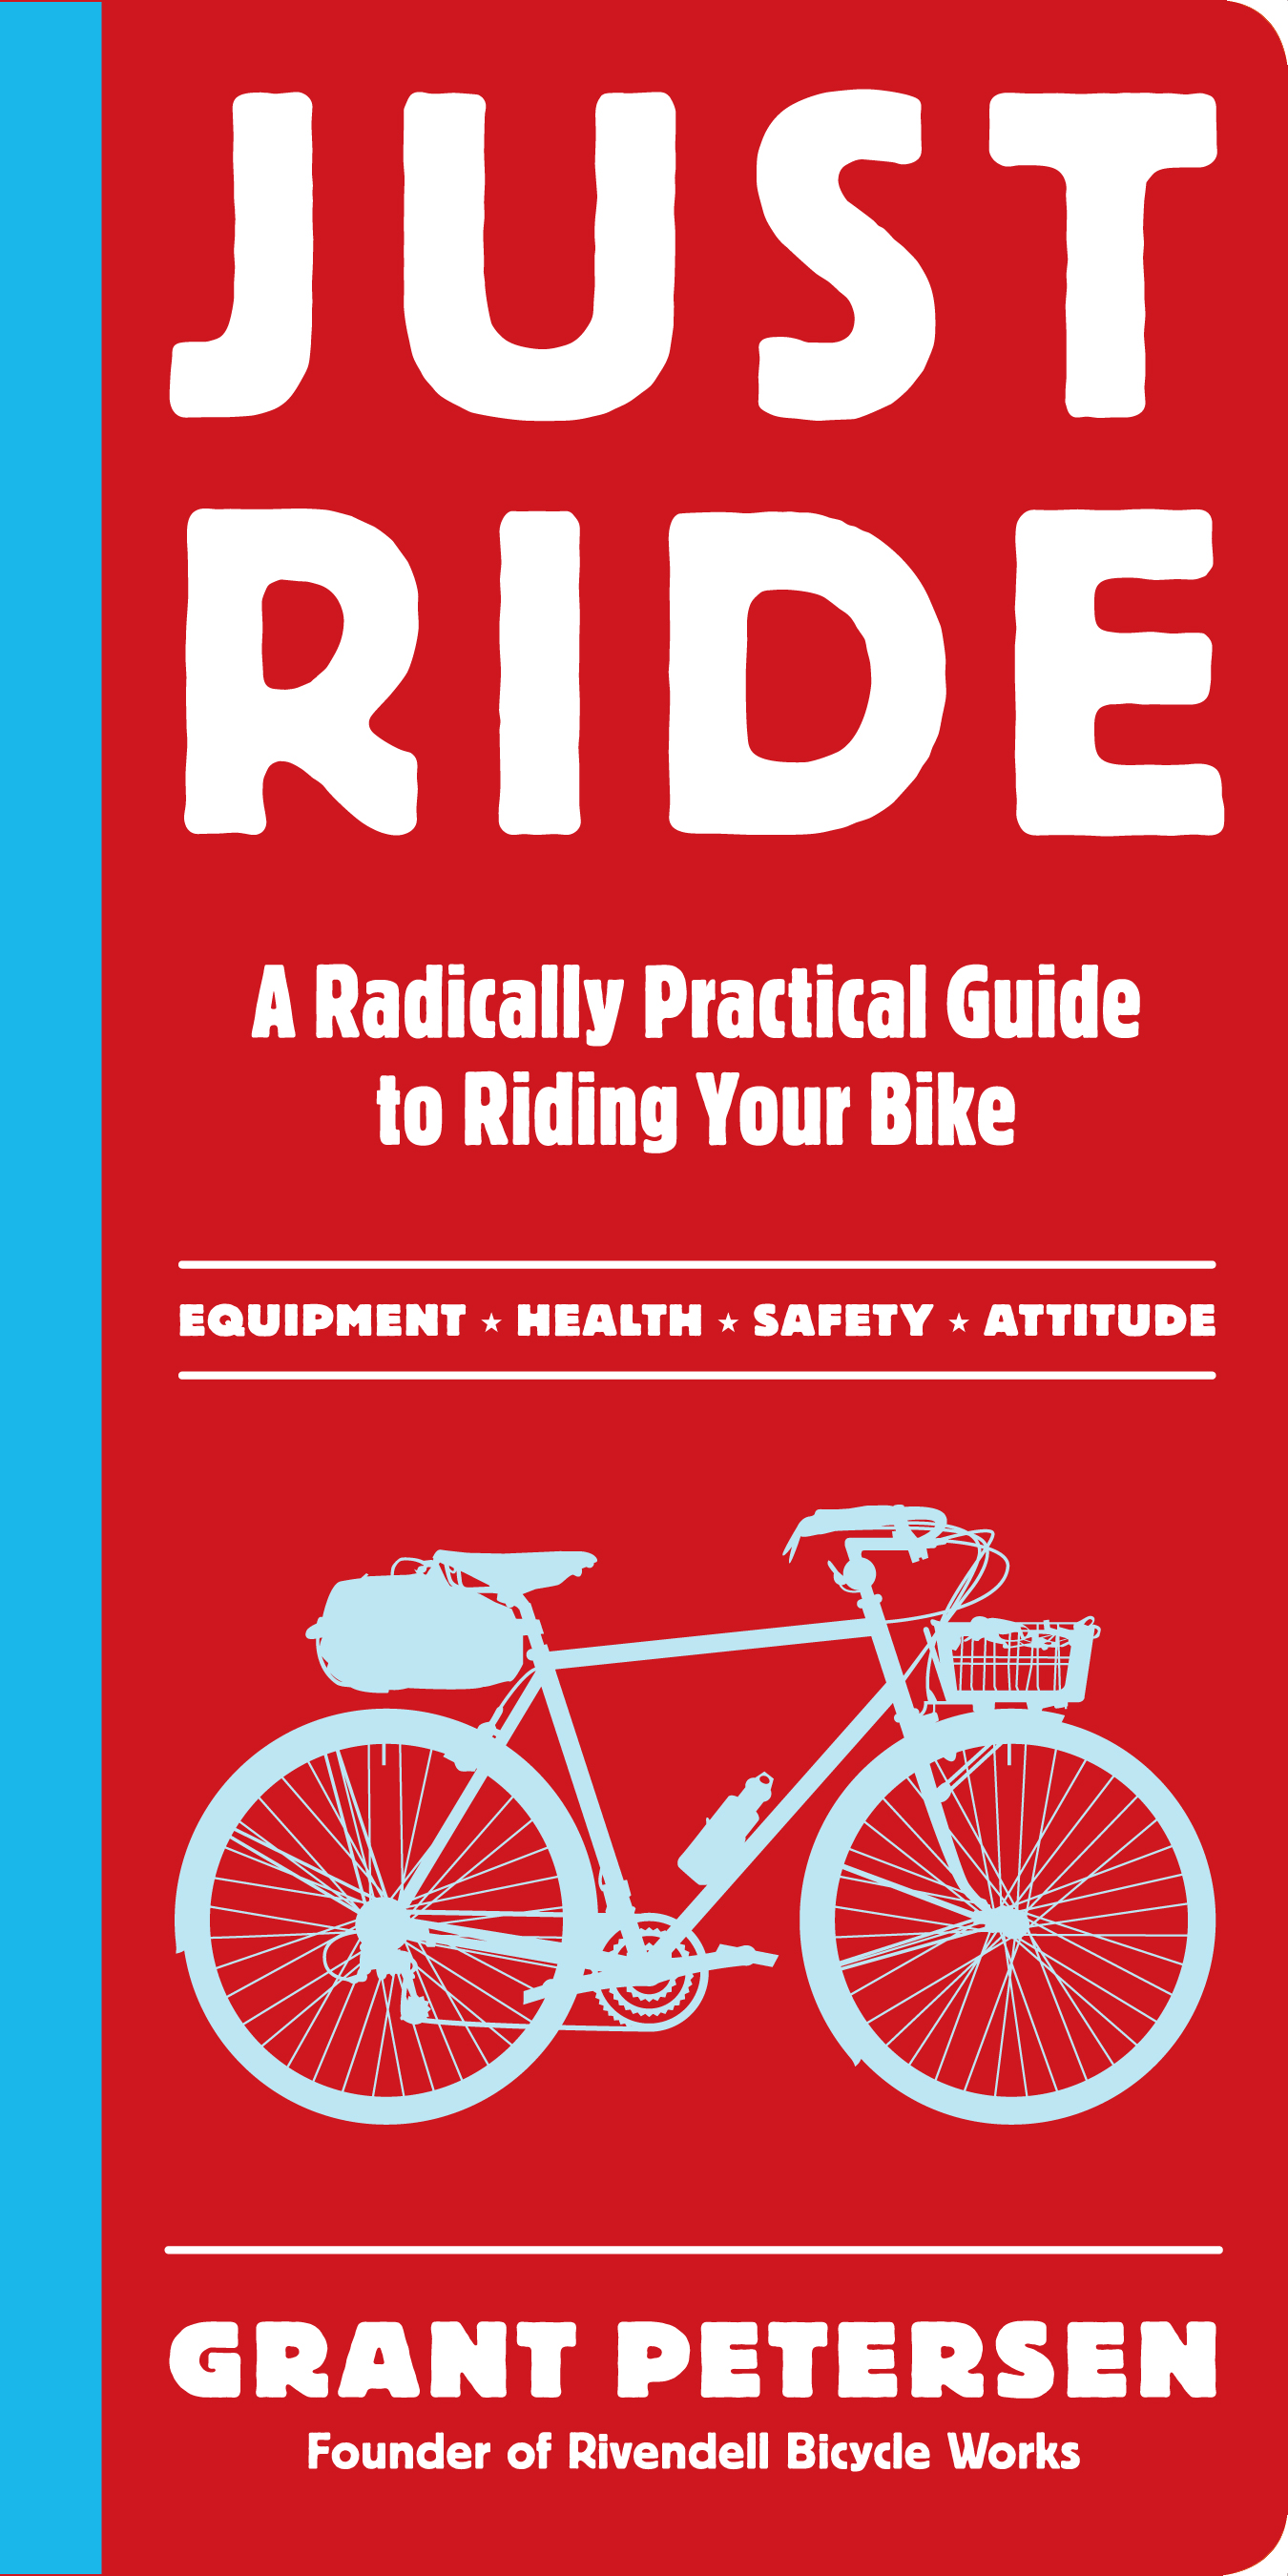 Just ride a radically practical guide to riding your bike cover image